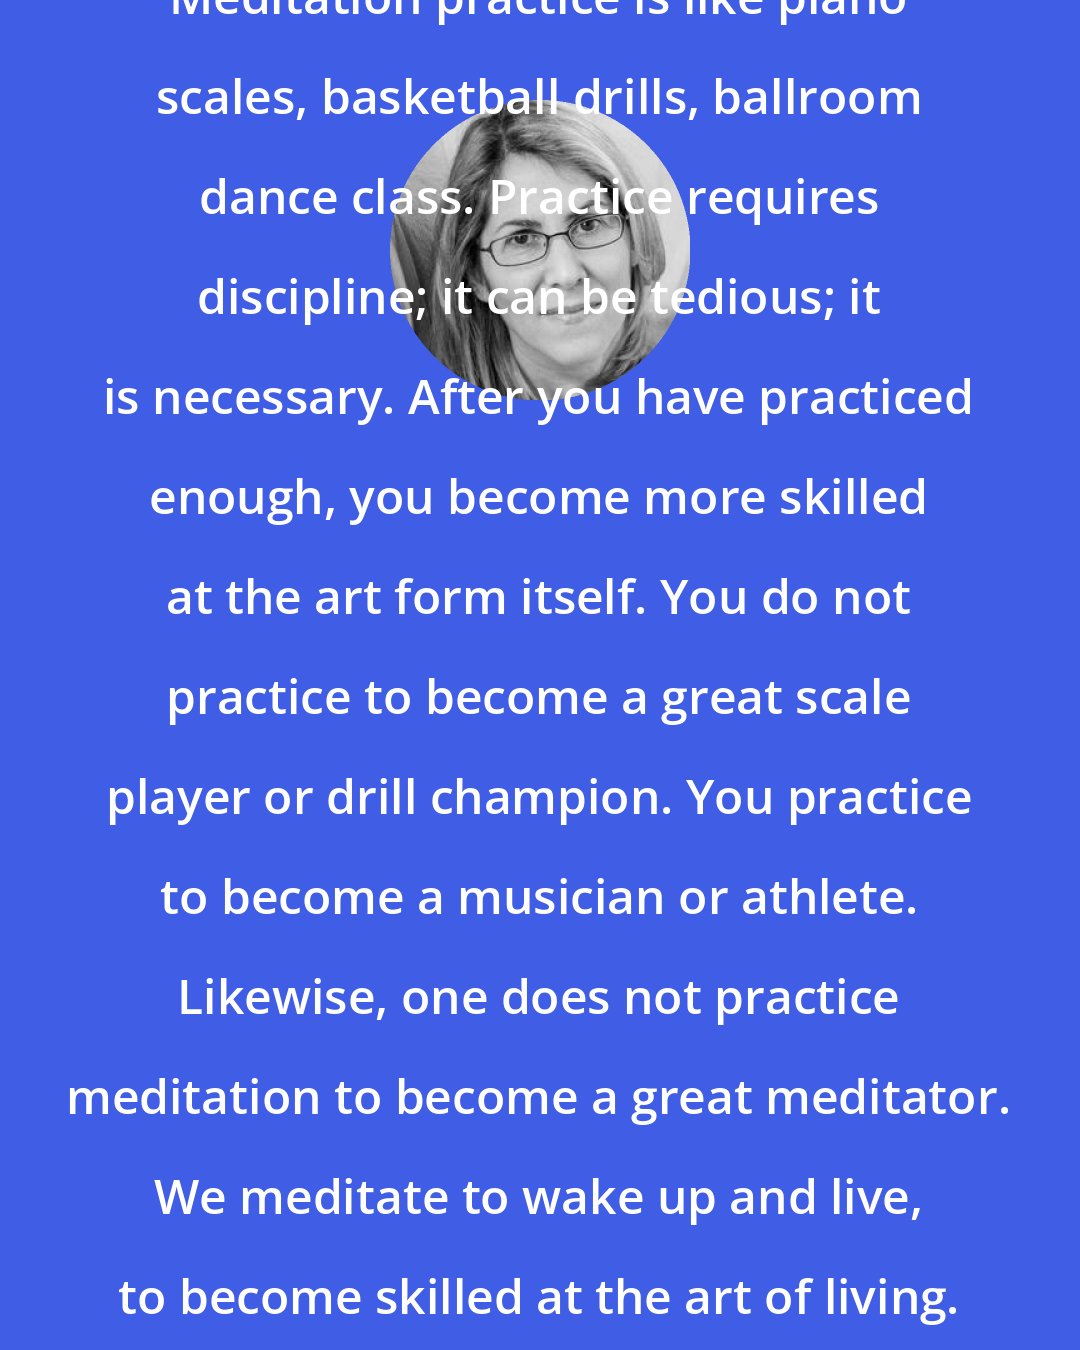 Elizabeth Lesser: Meditation practice is like piano scales, basketball drills, ballroom dance class. Practice requires discipline; it can be tedious; it is necessary. After you have practiced enough, you become more skilled at the art form itself. You do not practice to become a great scale player or drill champion. You practice to become a musician or athlete. Likewise, one does not practice meditation to become a great meditator. We meditate to wake up and live, to become skilled at the art of living.